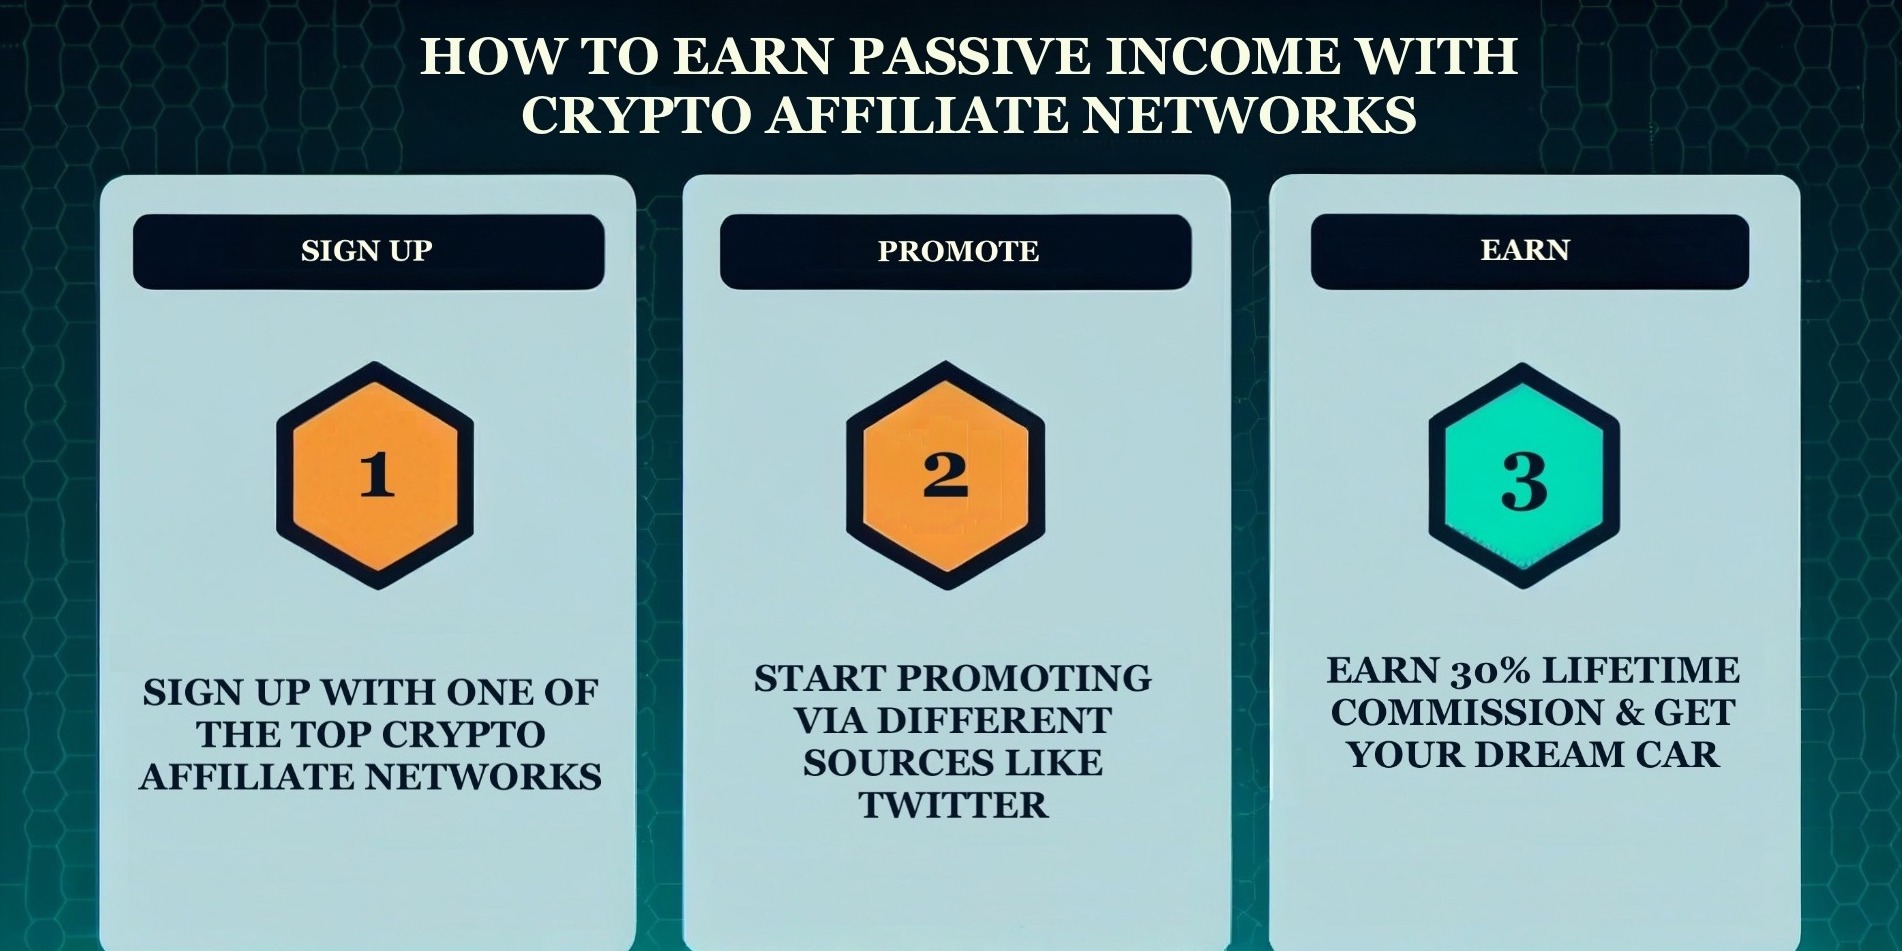 Showing 3 Steps on How to Earn Passive Income with Crypto Affiliate Networks - Sign Up, Promote, Earn